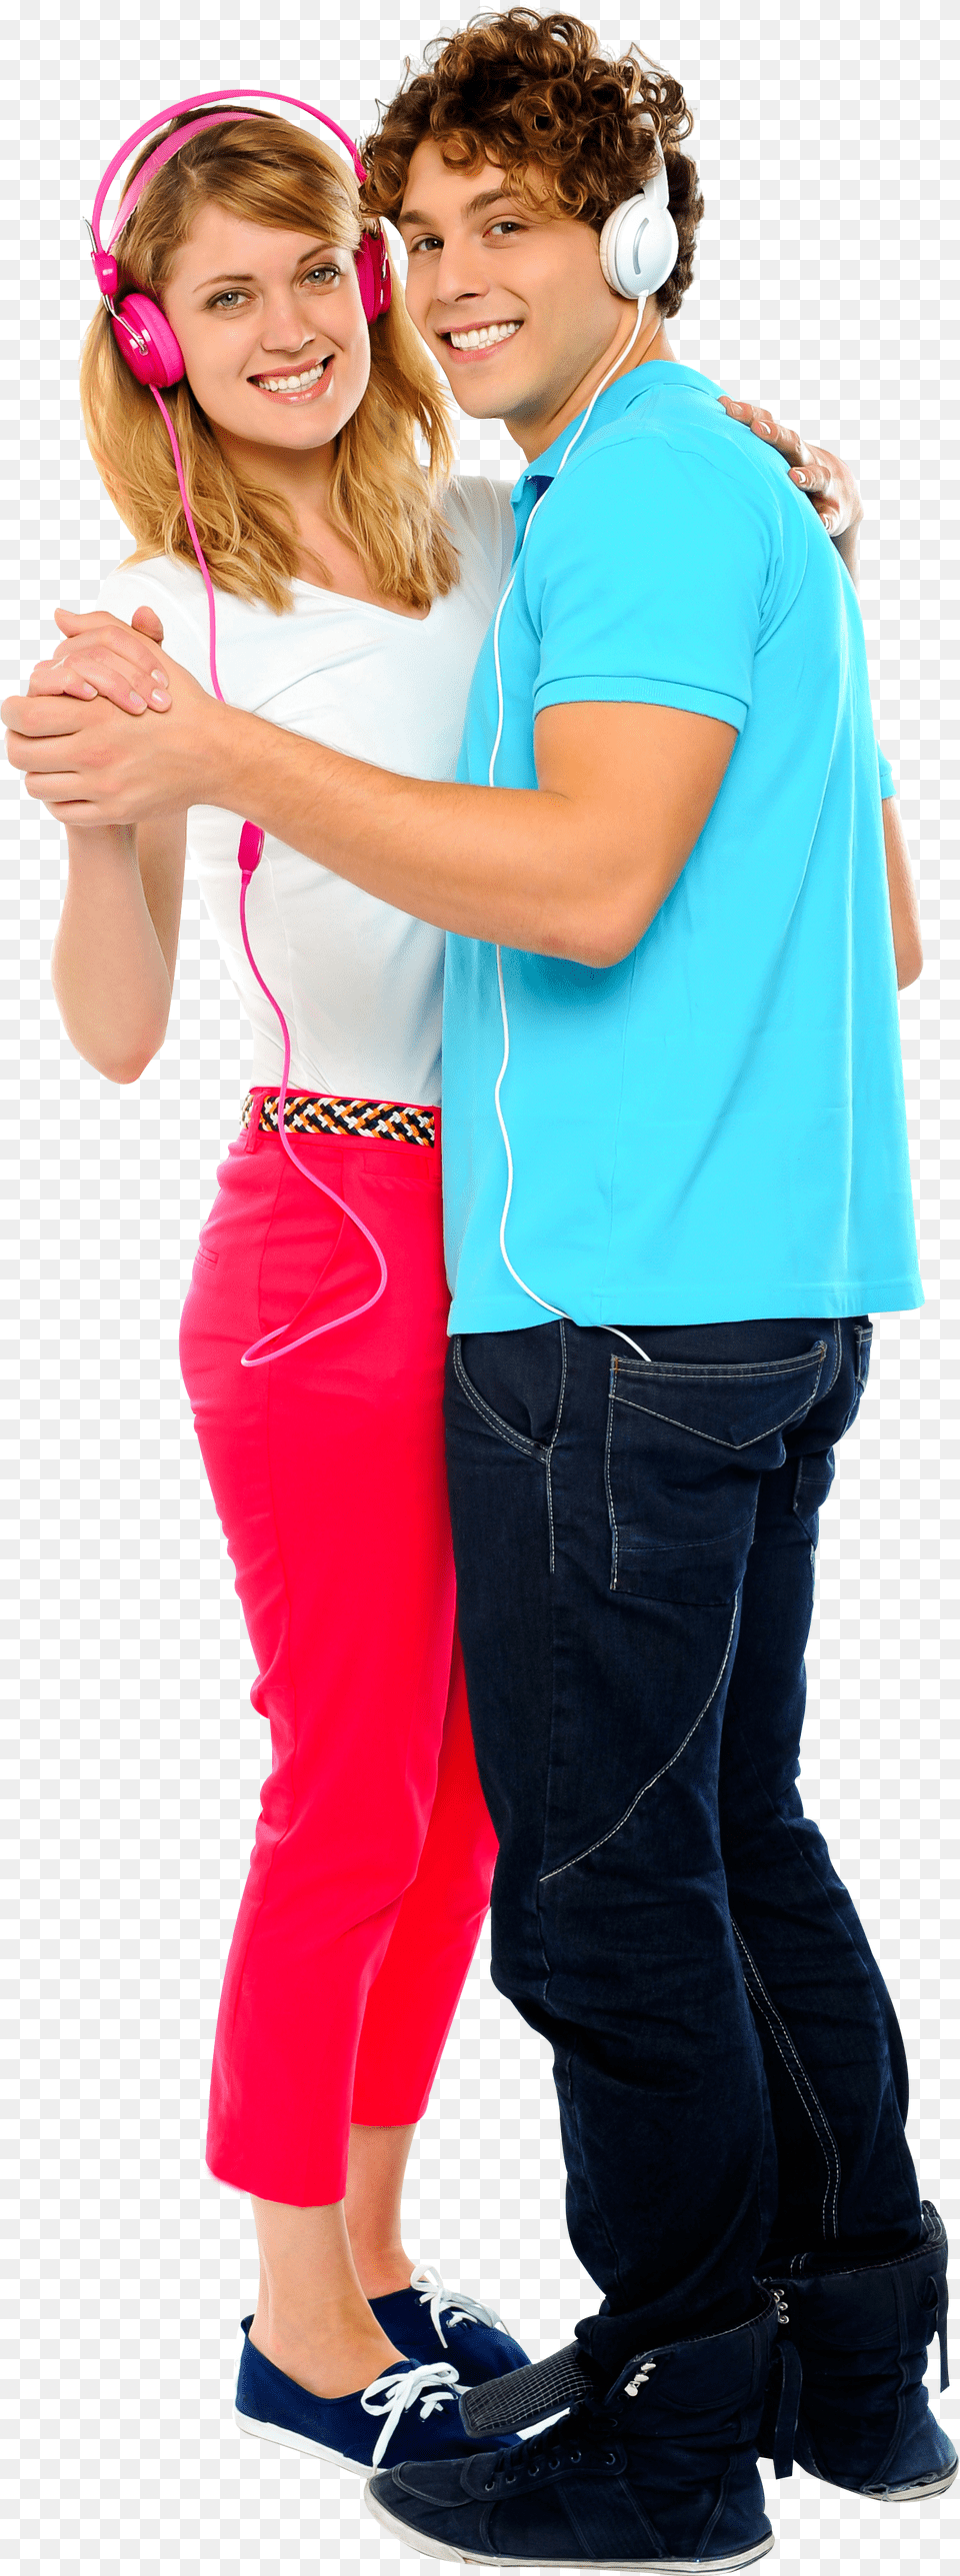 Love Couple Image For Download Portable Network Graphics Free Png